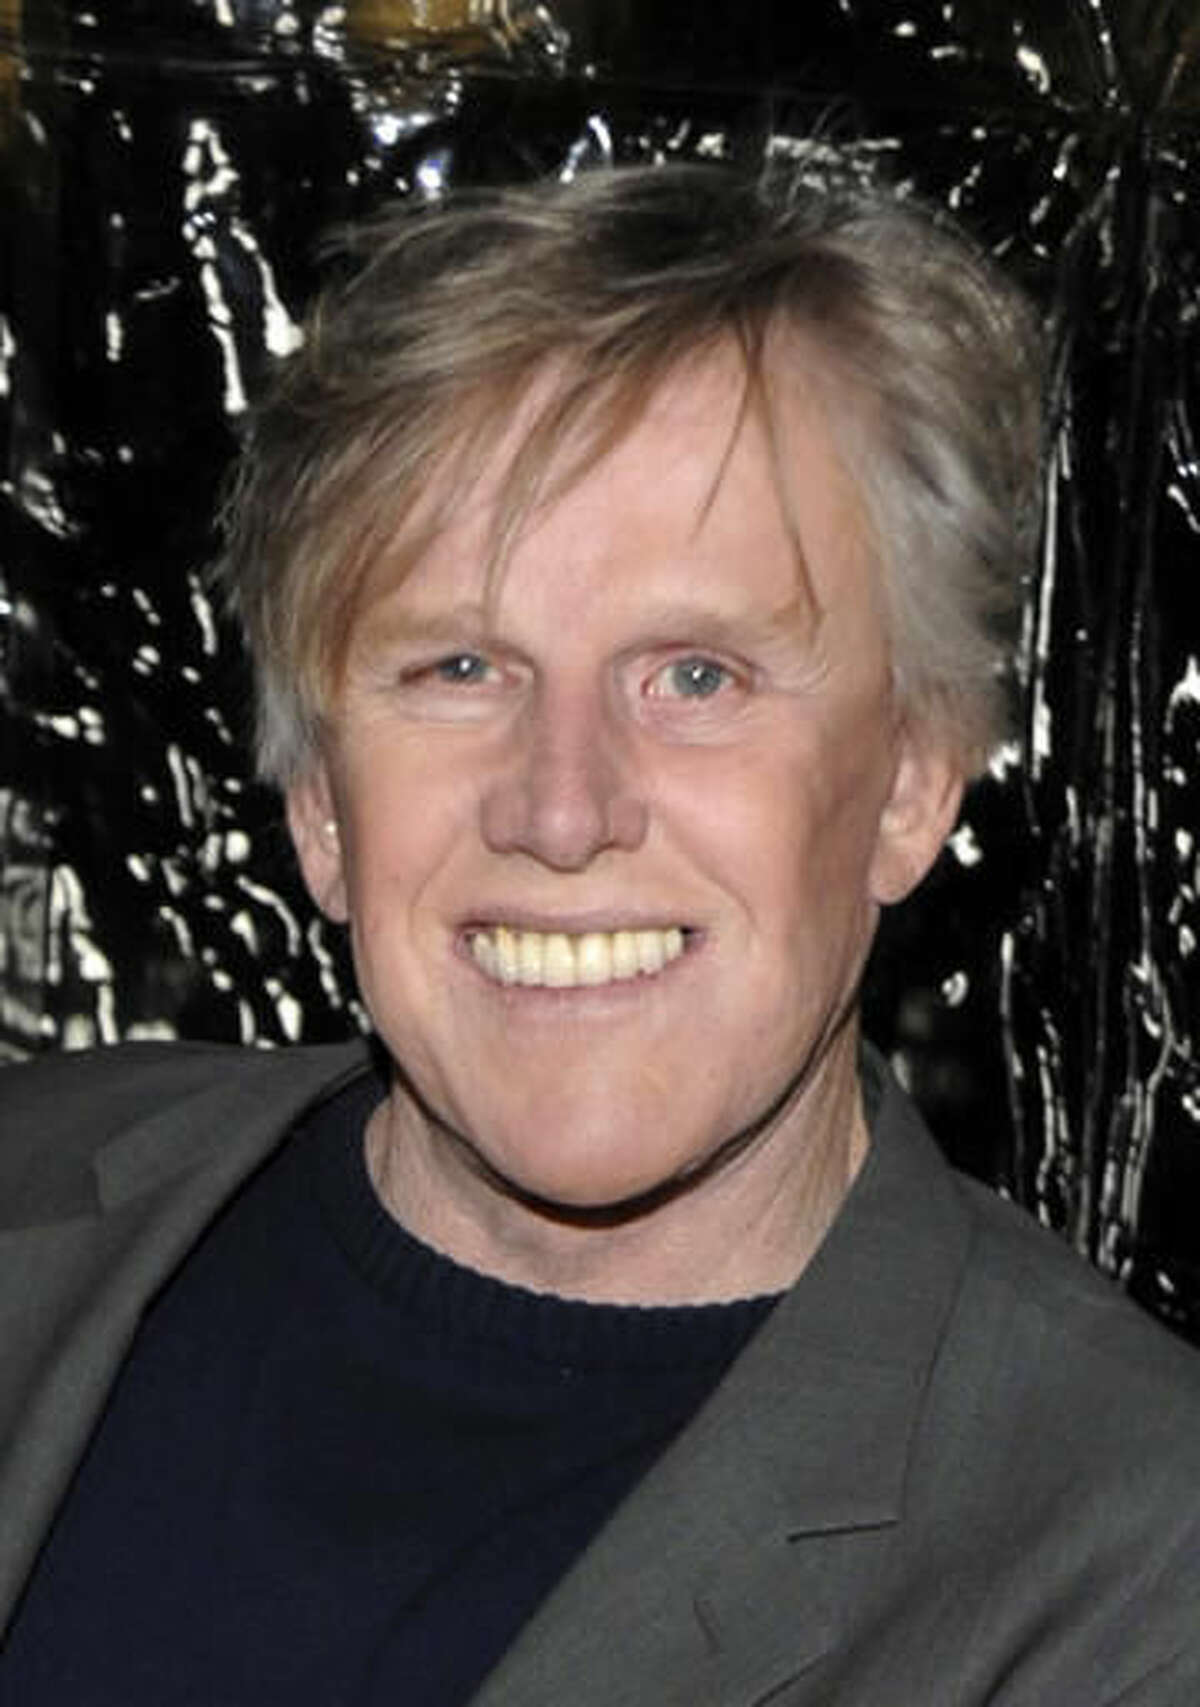 FILE - In this Dec. 8, 2009 file photo, actor Gary Busey arrives at the premiere of the feature film "Crazy Heart" in Beverly Hills, Calif. Busey will make his New York stage debut next month in the off-Broadway show "Perfect Crime," playing a serial killer in the cast of the longest-running play in city history. He will play Lionel McAuley, a charismatic serial killer starting Nov. 21, 2016 at The Theater Center near Times Square. (AP Photo/Dan Steinberg, file)